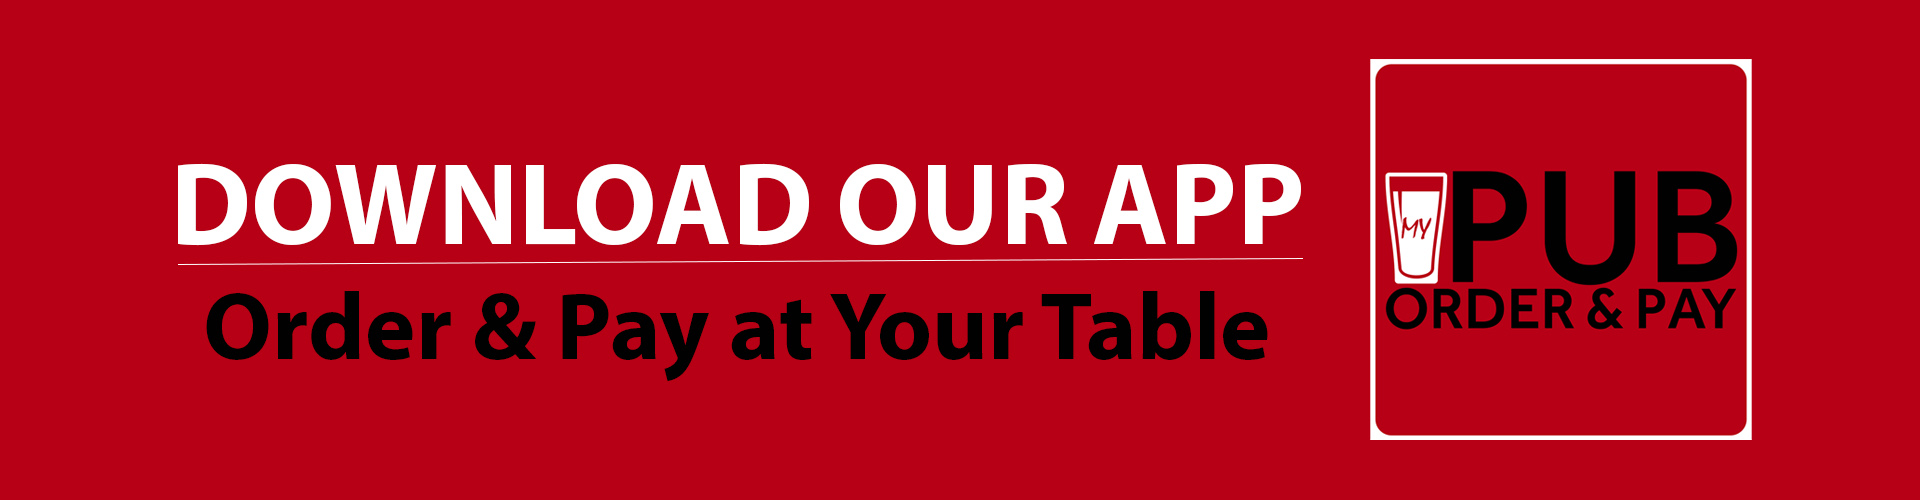 Download Our App - Order & Pay at Your Table.